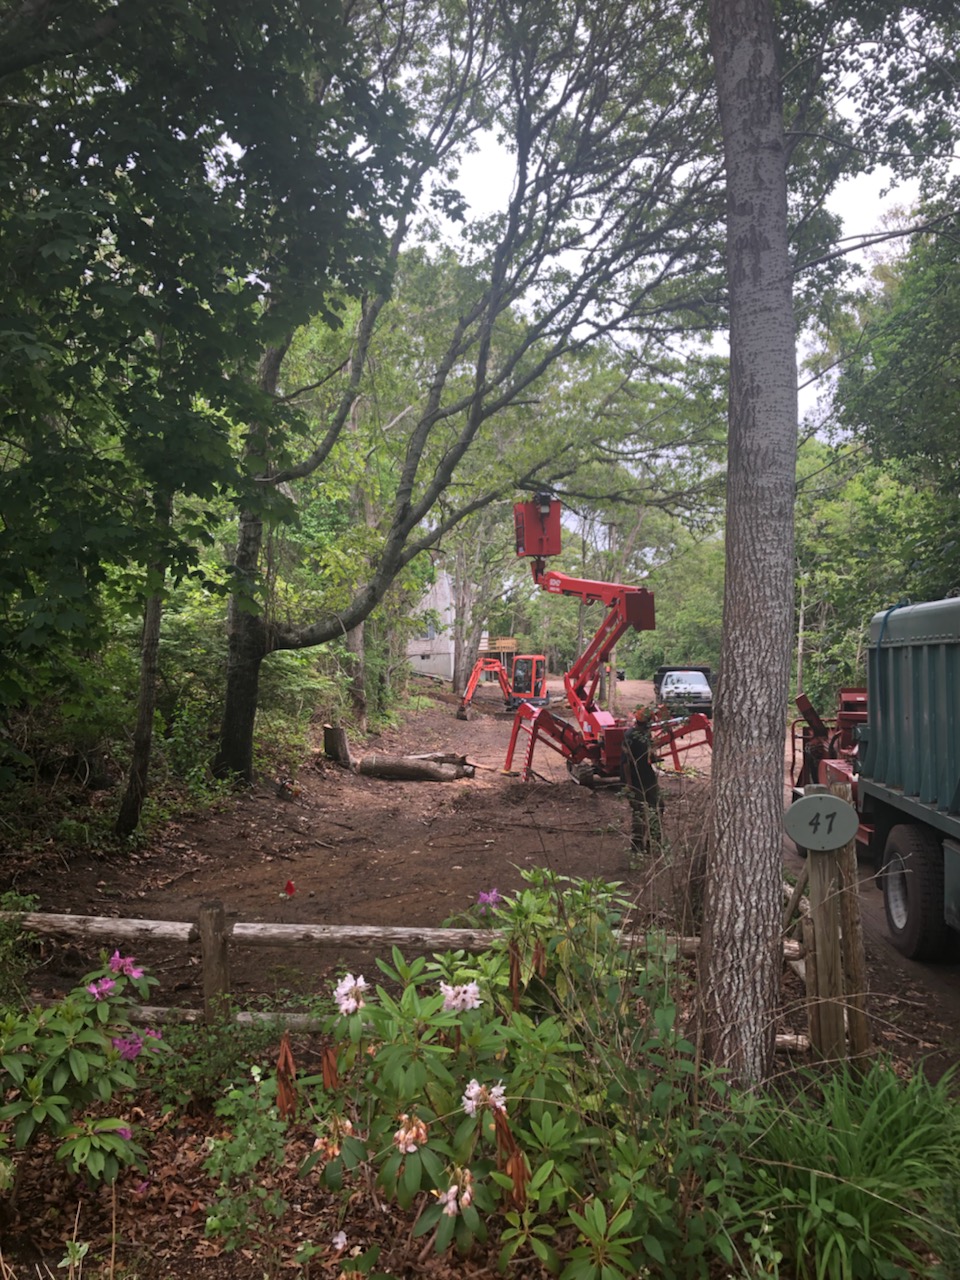 Tree trimming equipment in a wooded Cape Cod yard